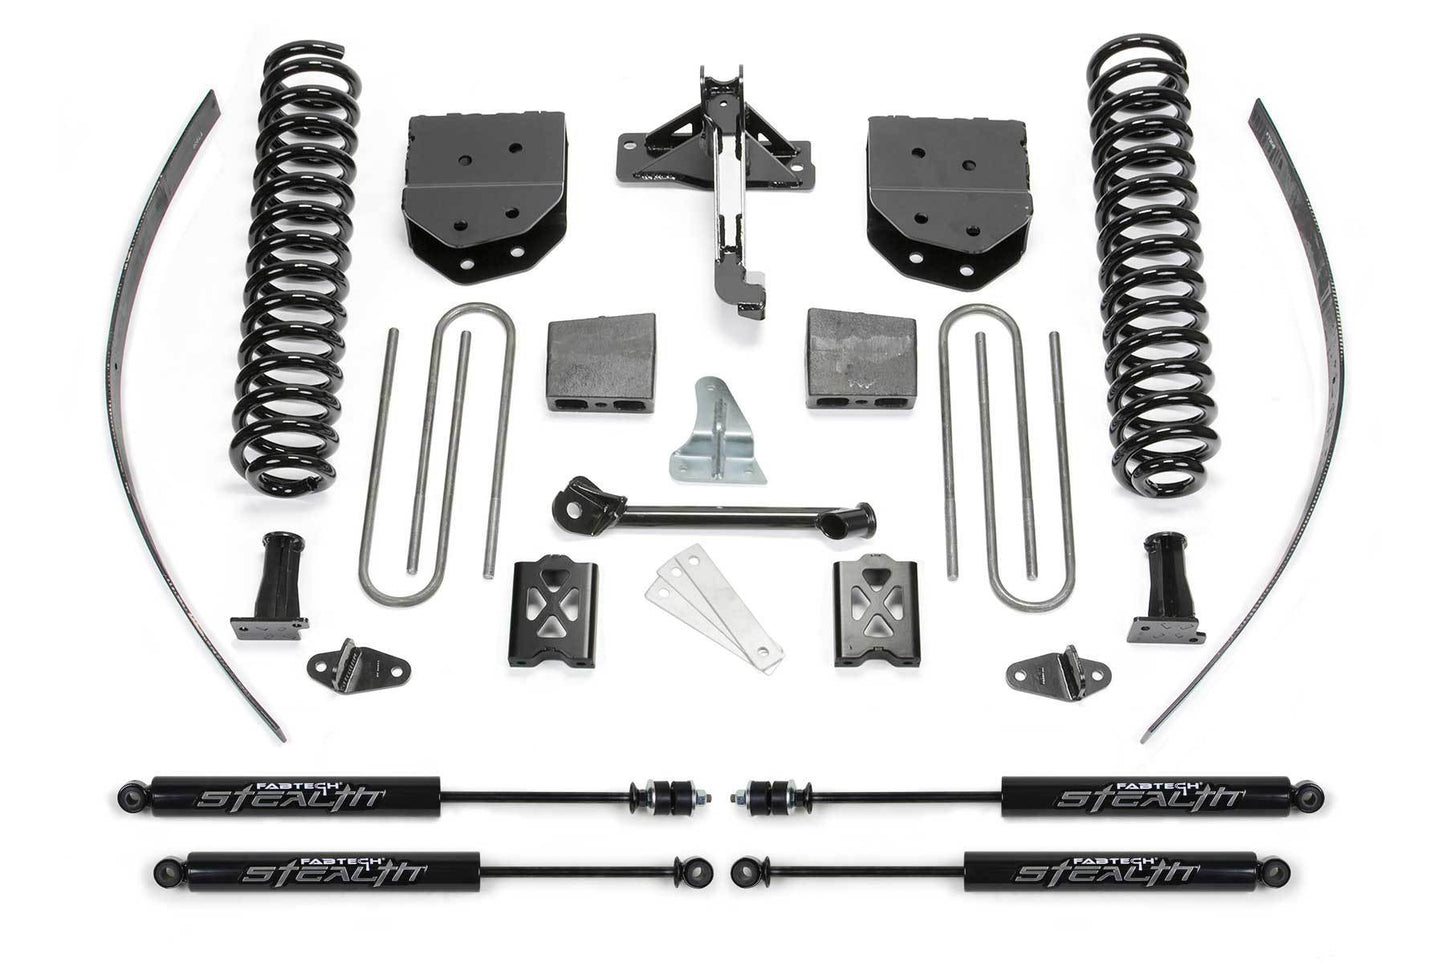 8" BASIC SYS W/STEALTH 05-07 FORD F250 4WD W/O FACTORY OVERLOAD - 8" BASIC SYS W/STEAL - Fabtech - Texas Complete Truck Center